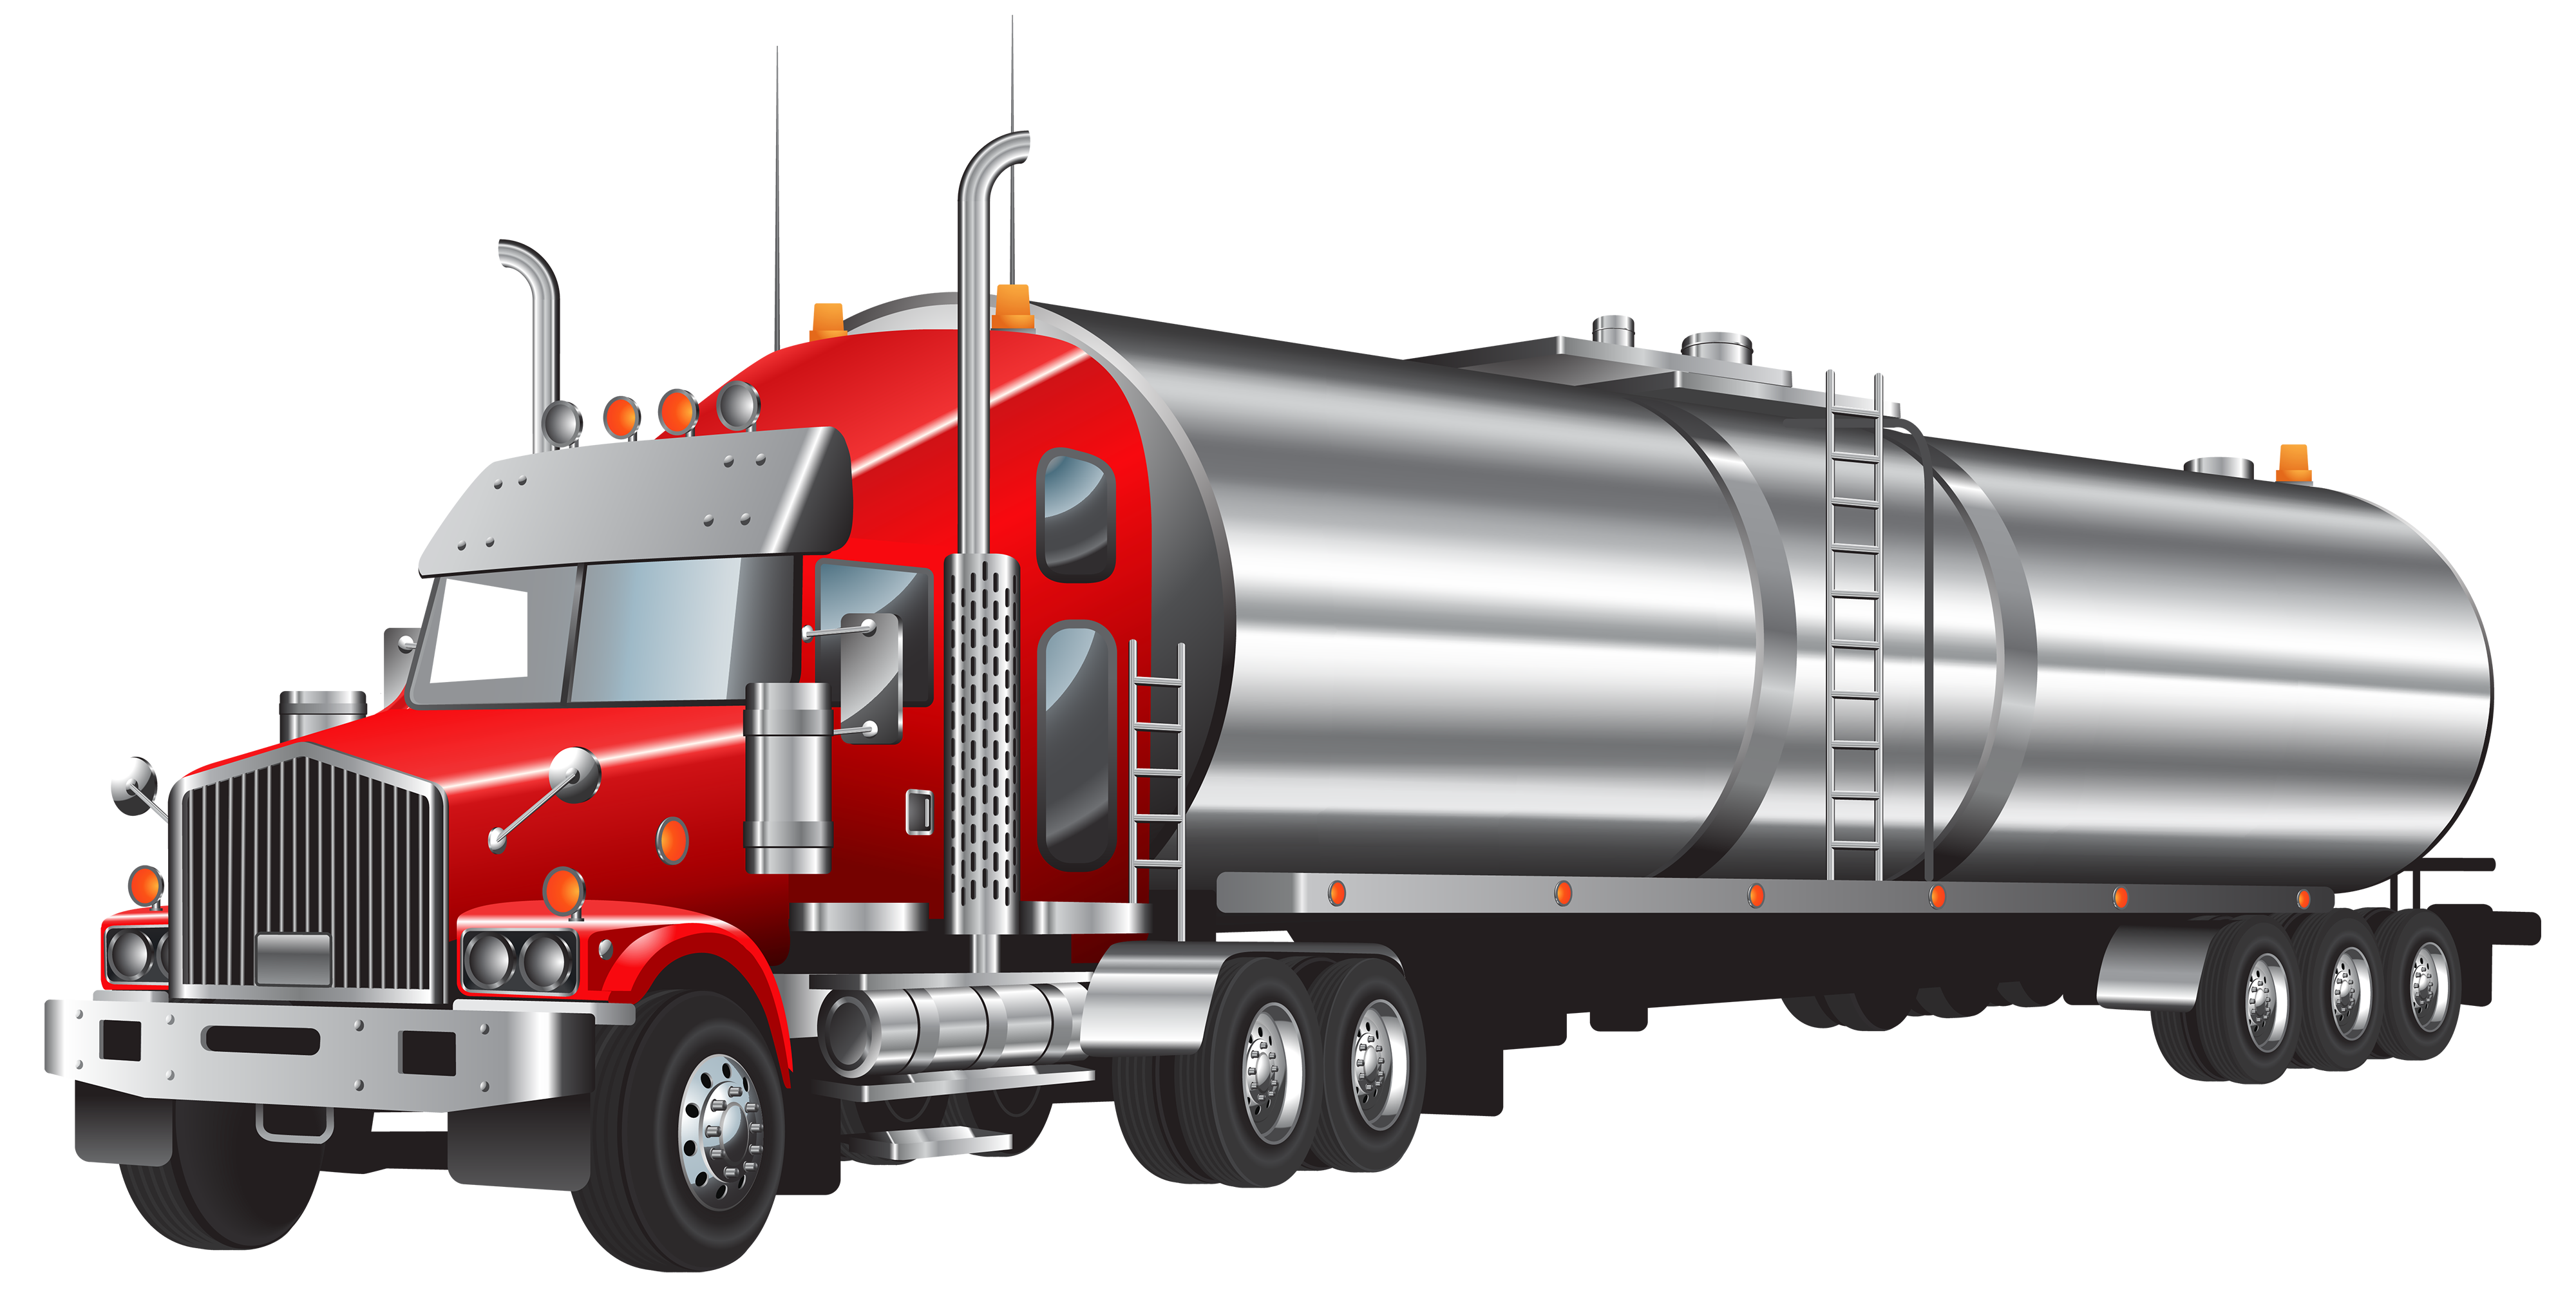 clipart free truck - photo #44